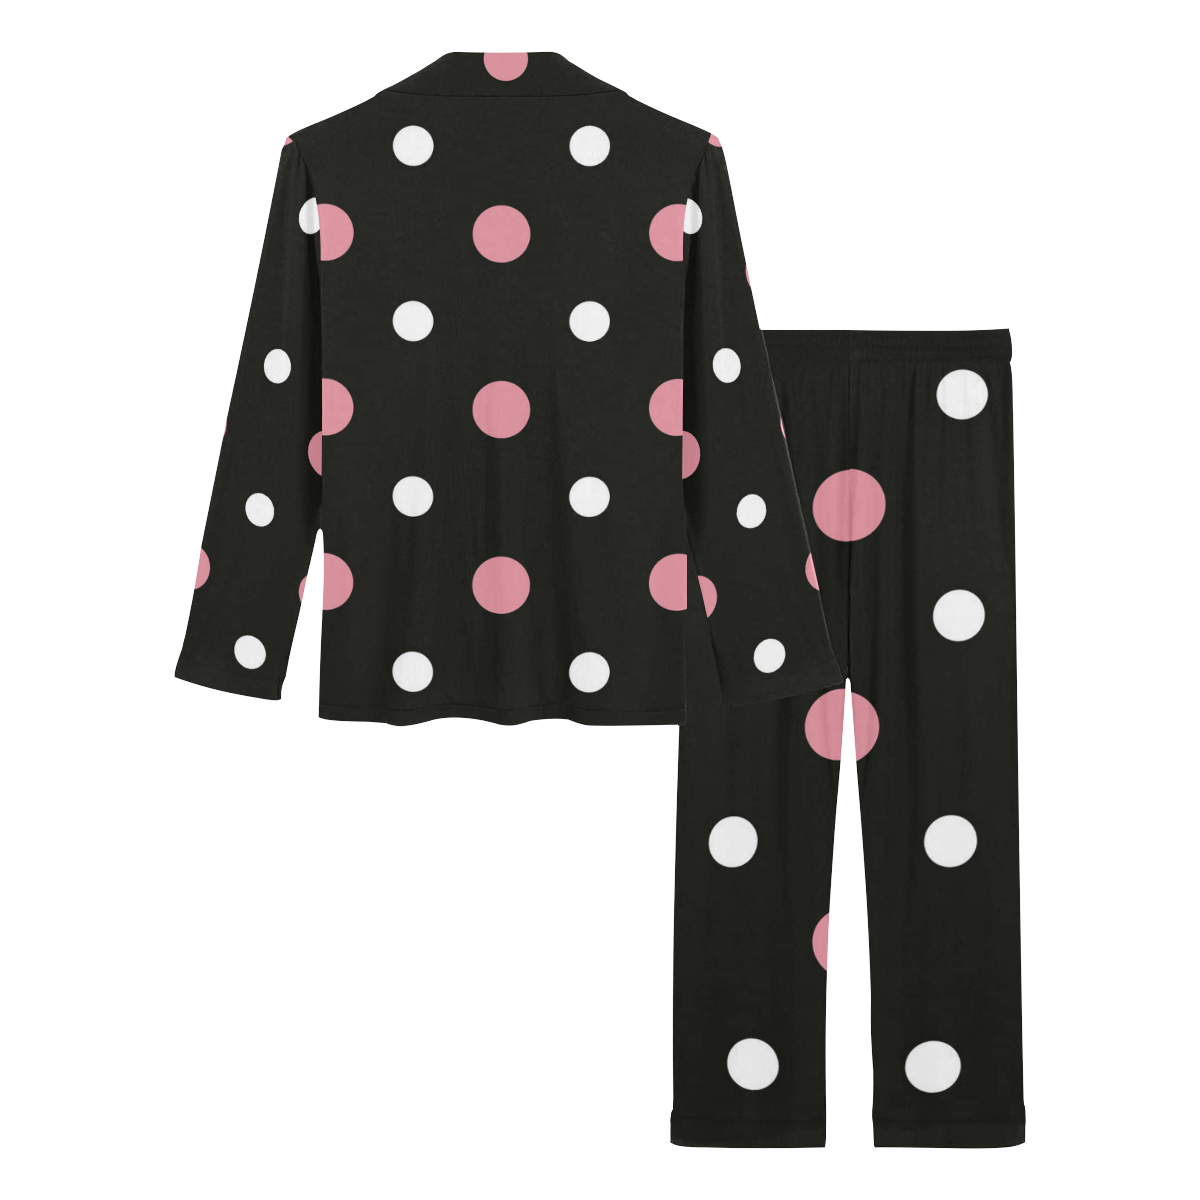 BLACK WITH PINK AND W2HITE DOTS Women's Long Pajama Set